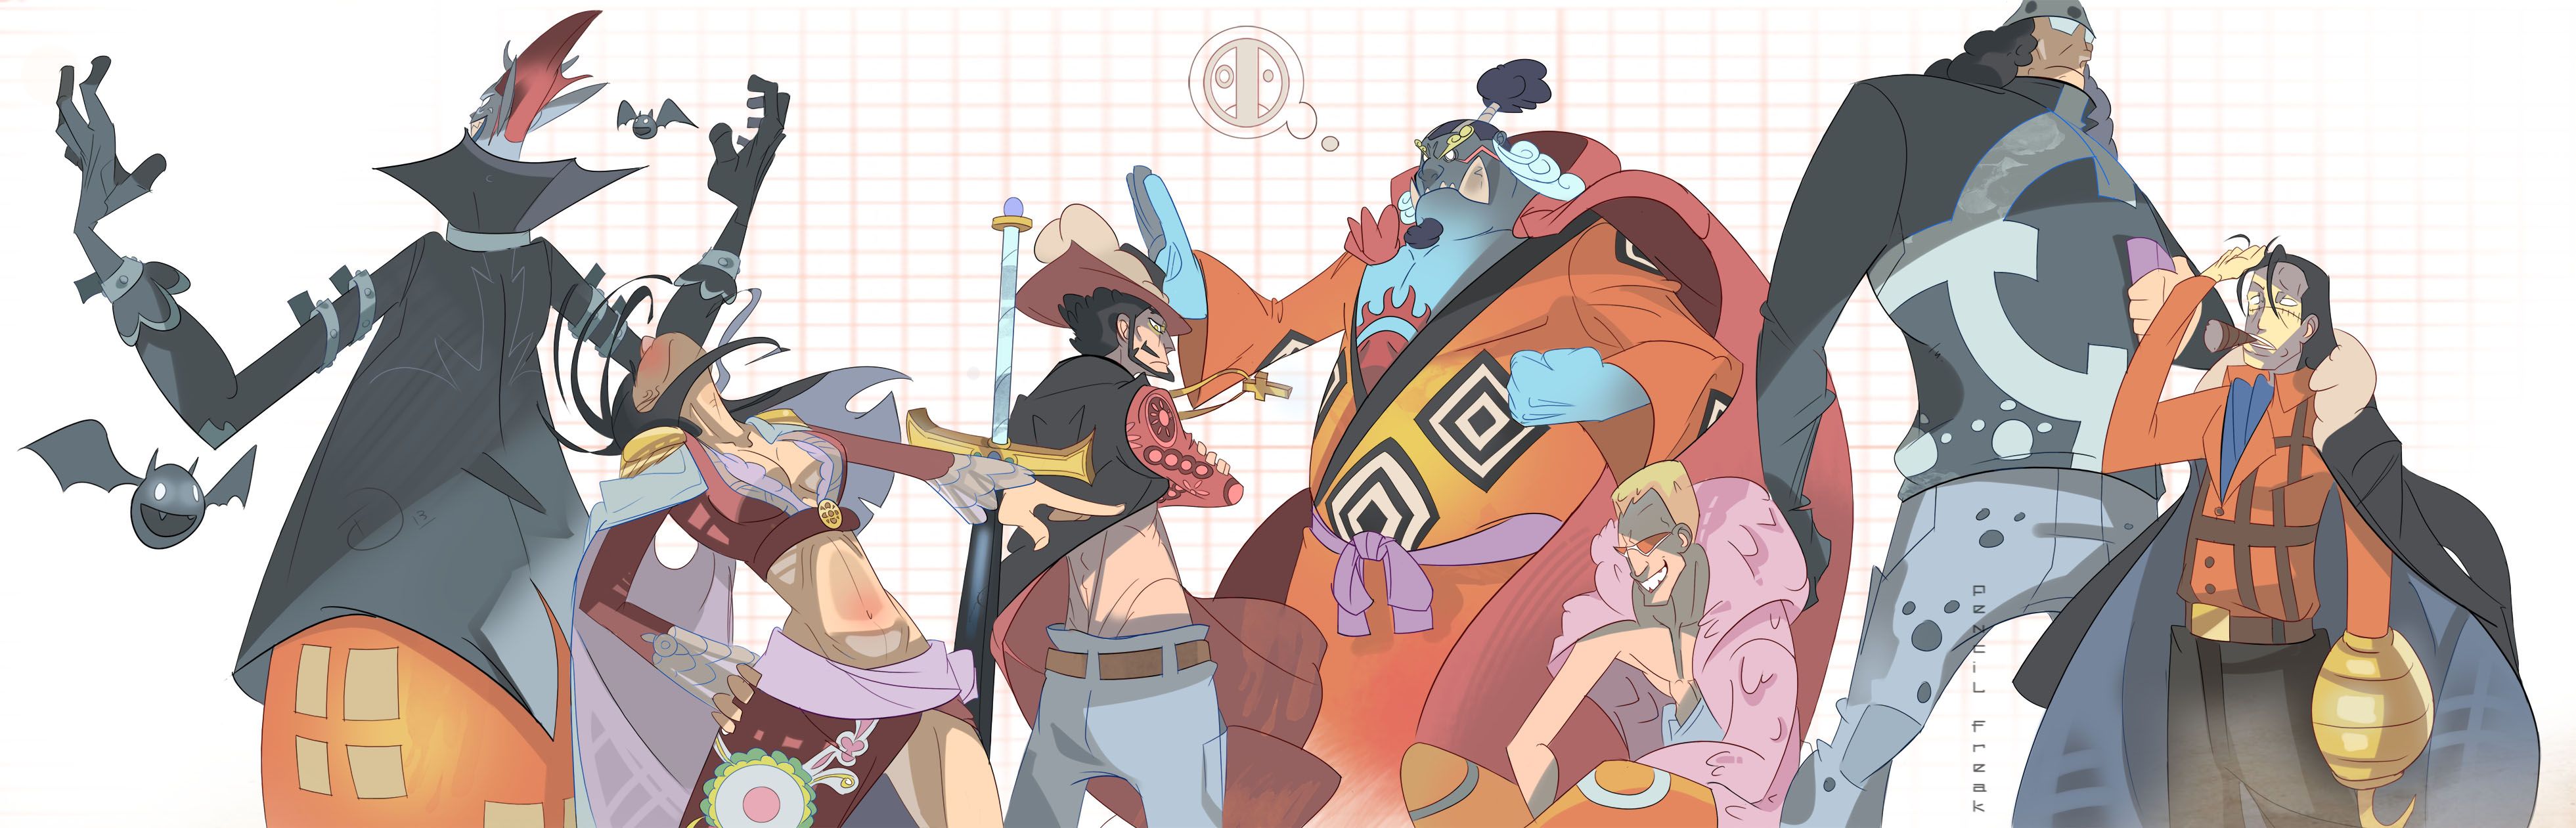 Warlords By G Jaggerjack. One Piece Anime, , One Piece